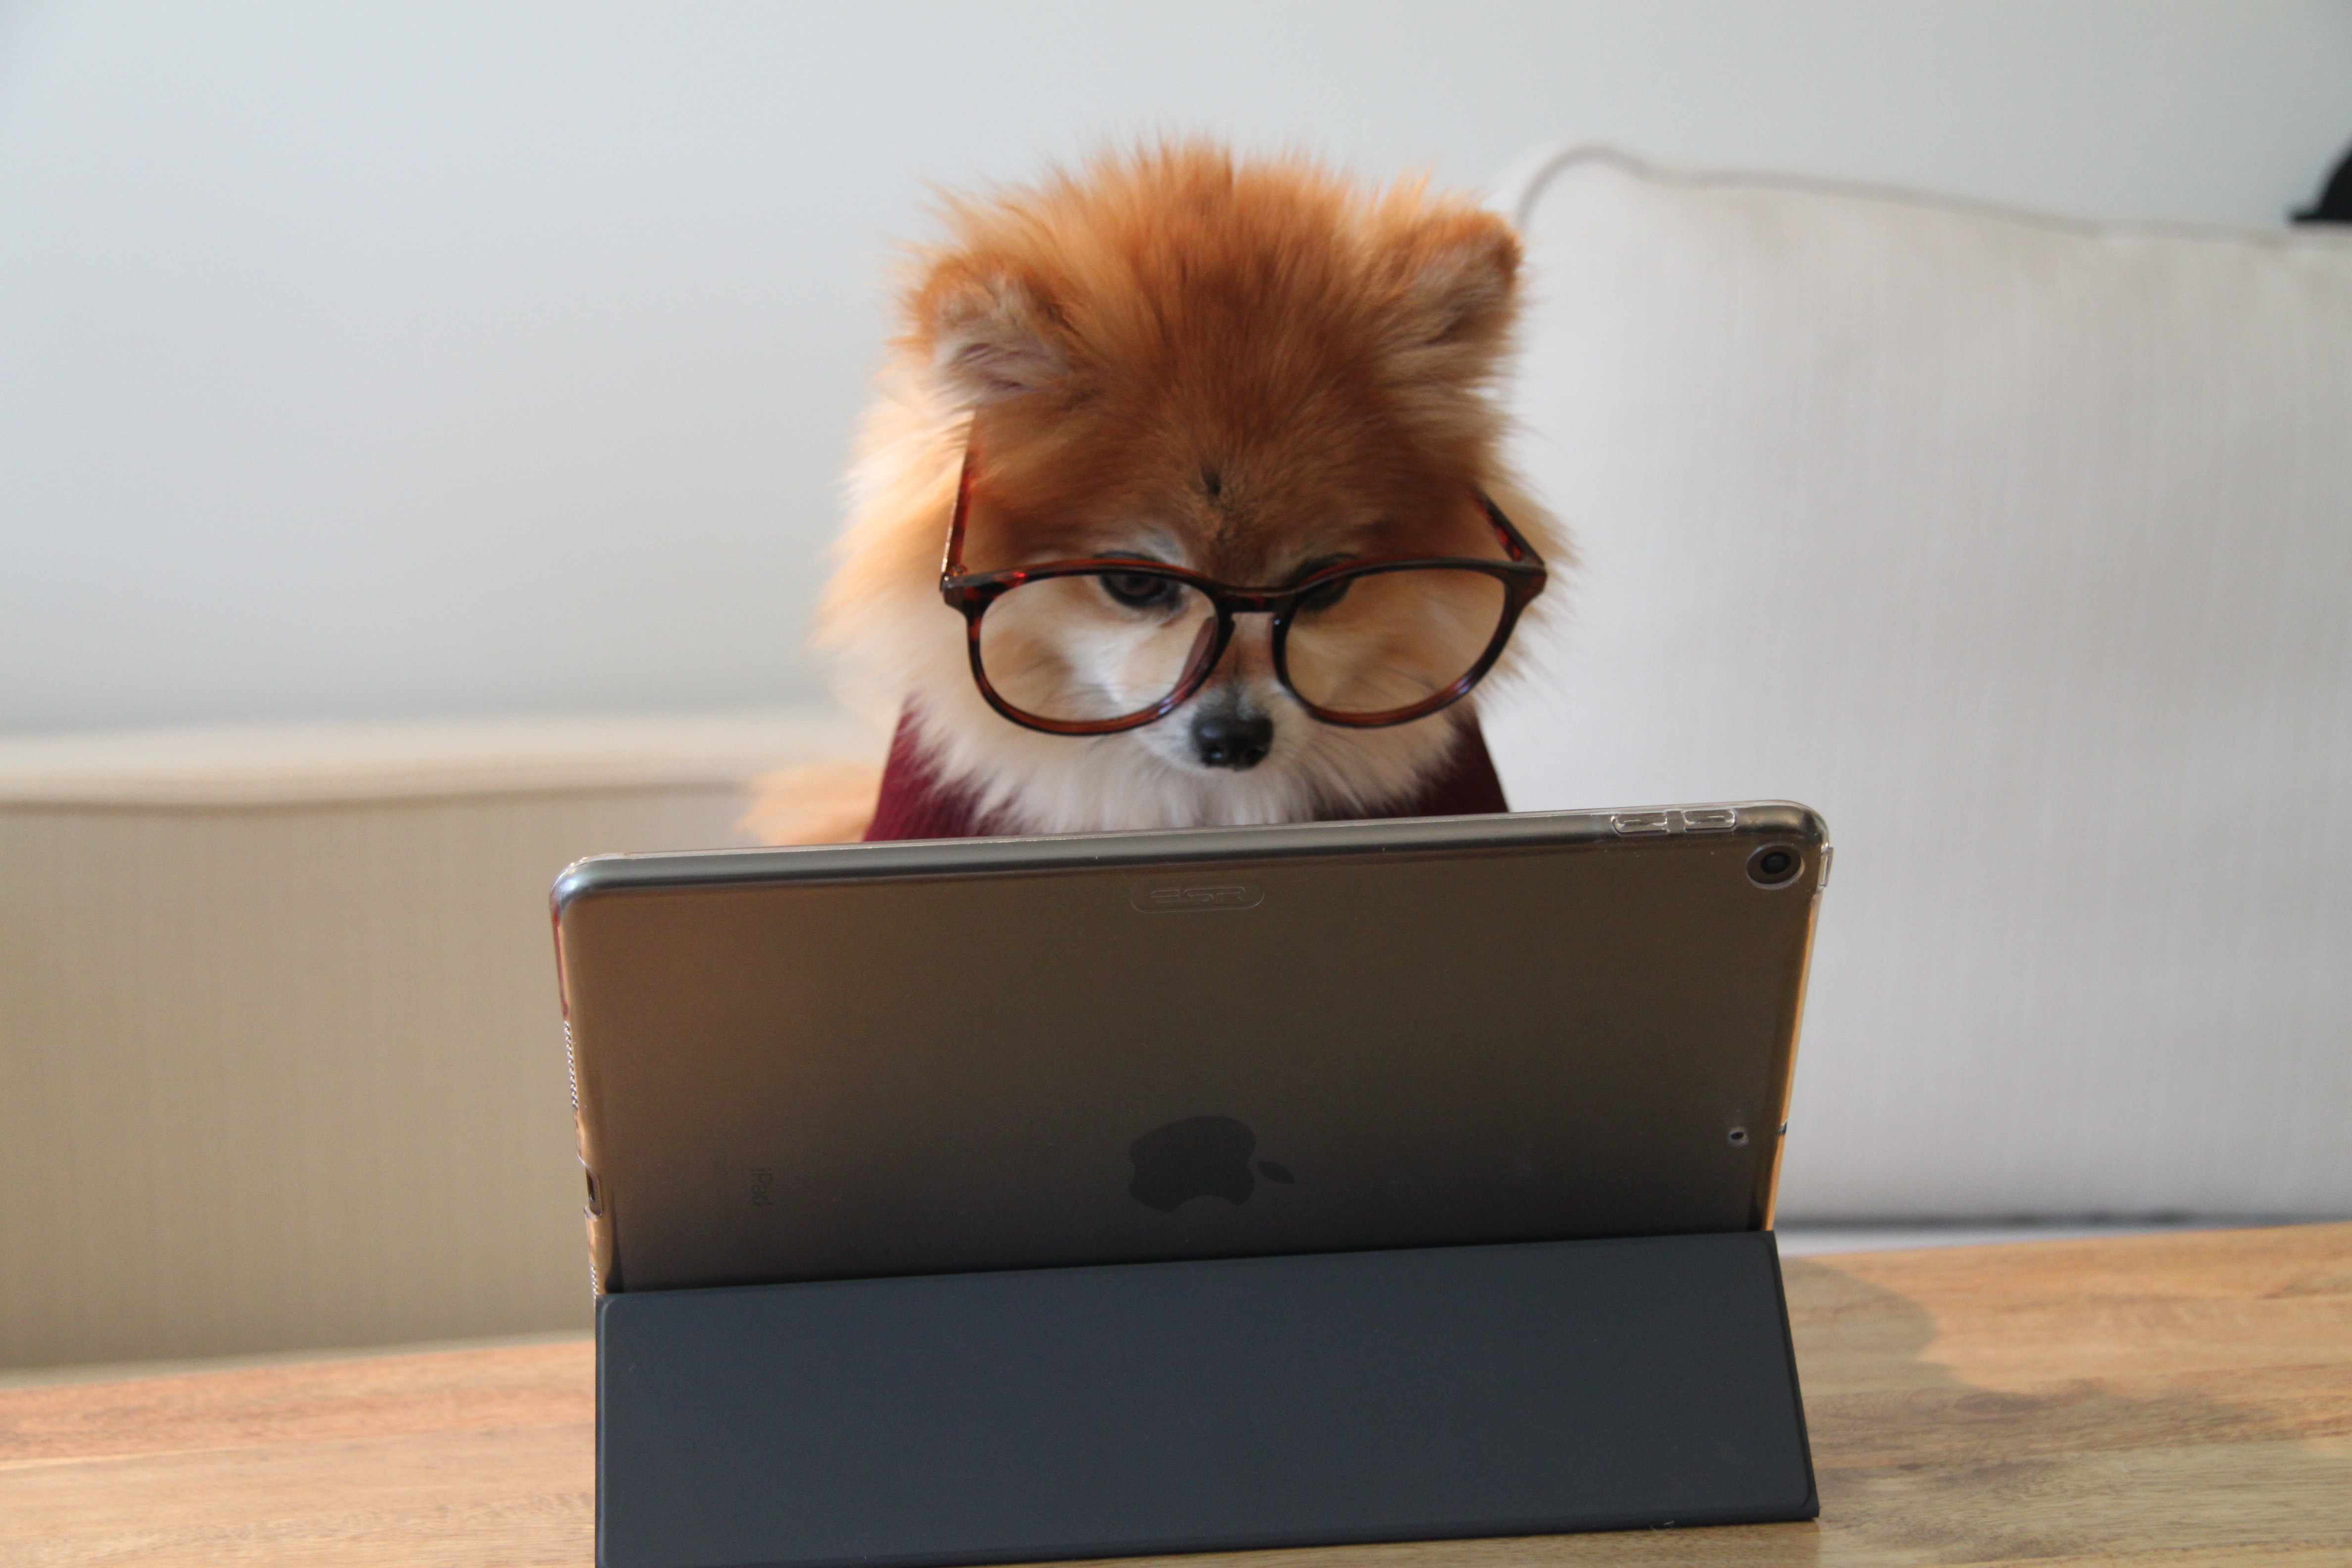 Dog checking his email